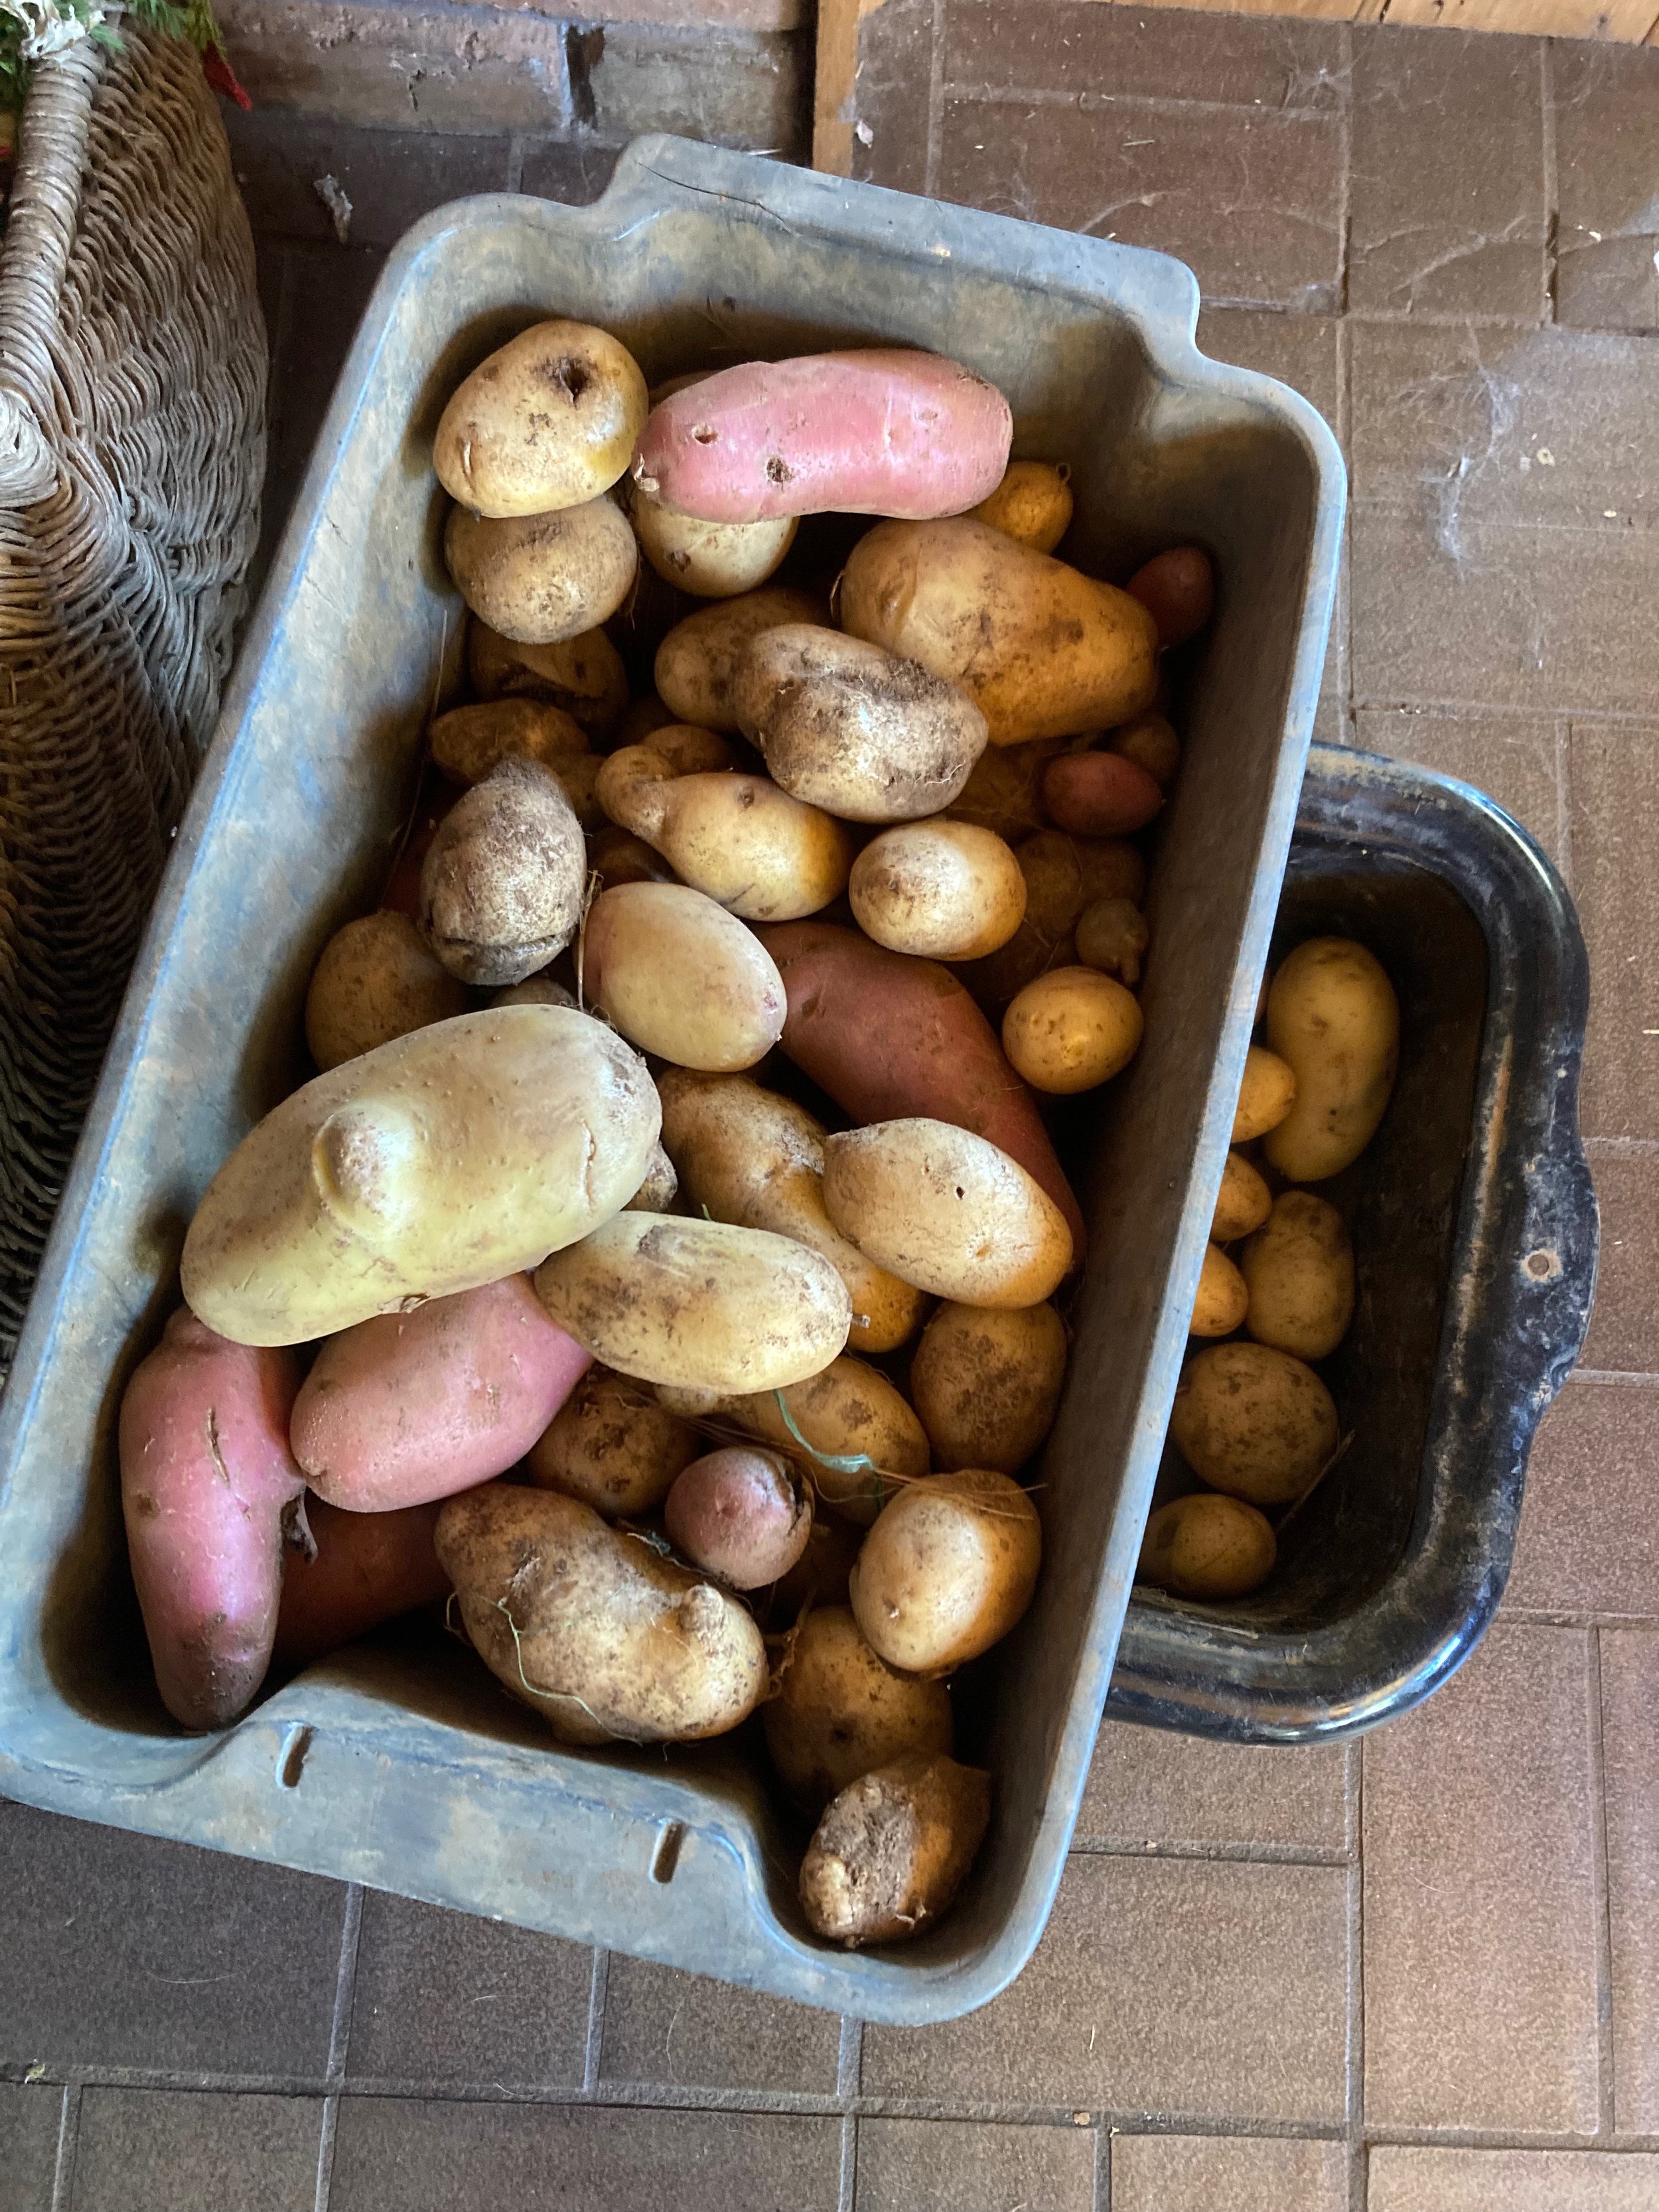 Plastic tub full of pink and yellow potatoes